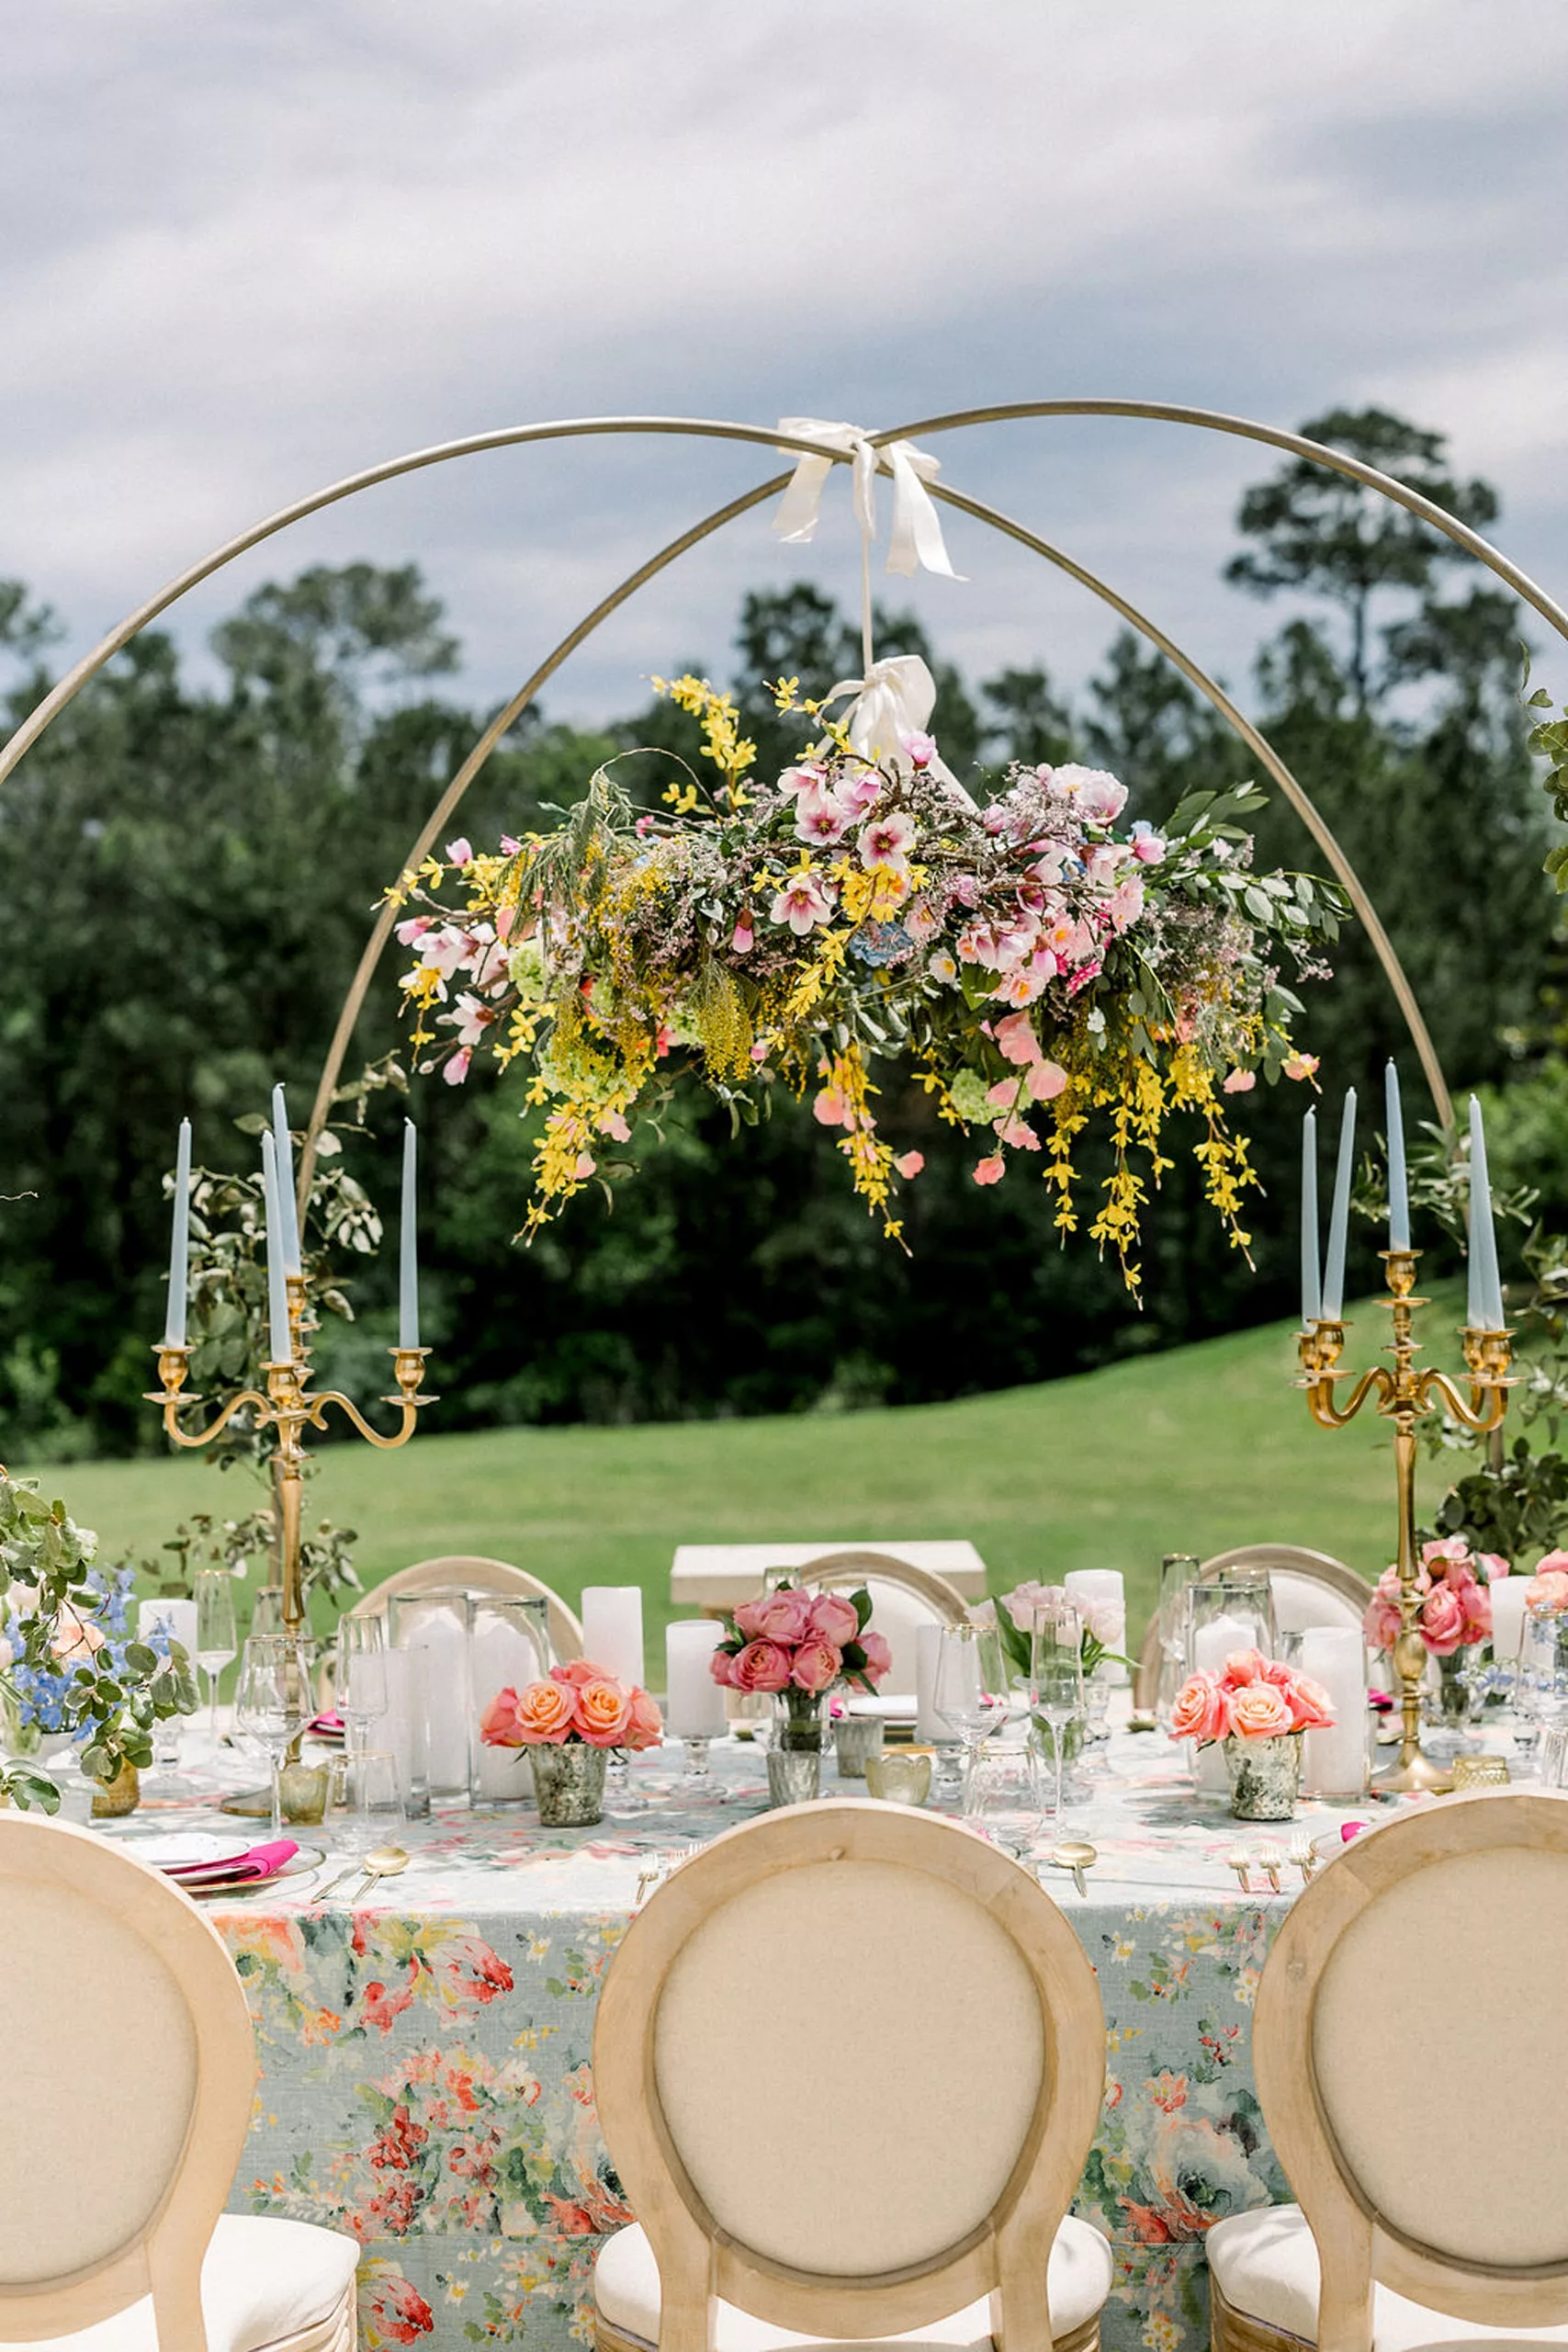 Details of an outdoor reception set up with a gold arch holding a large floating floral centerpiece at an iron manor wedding